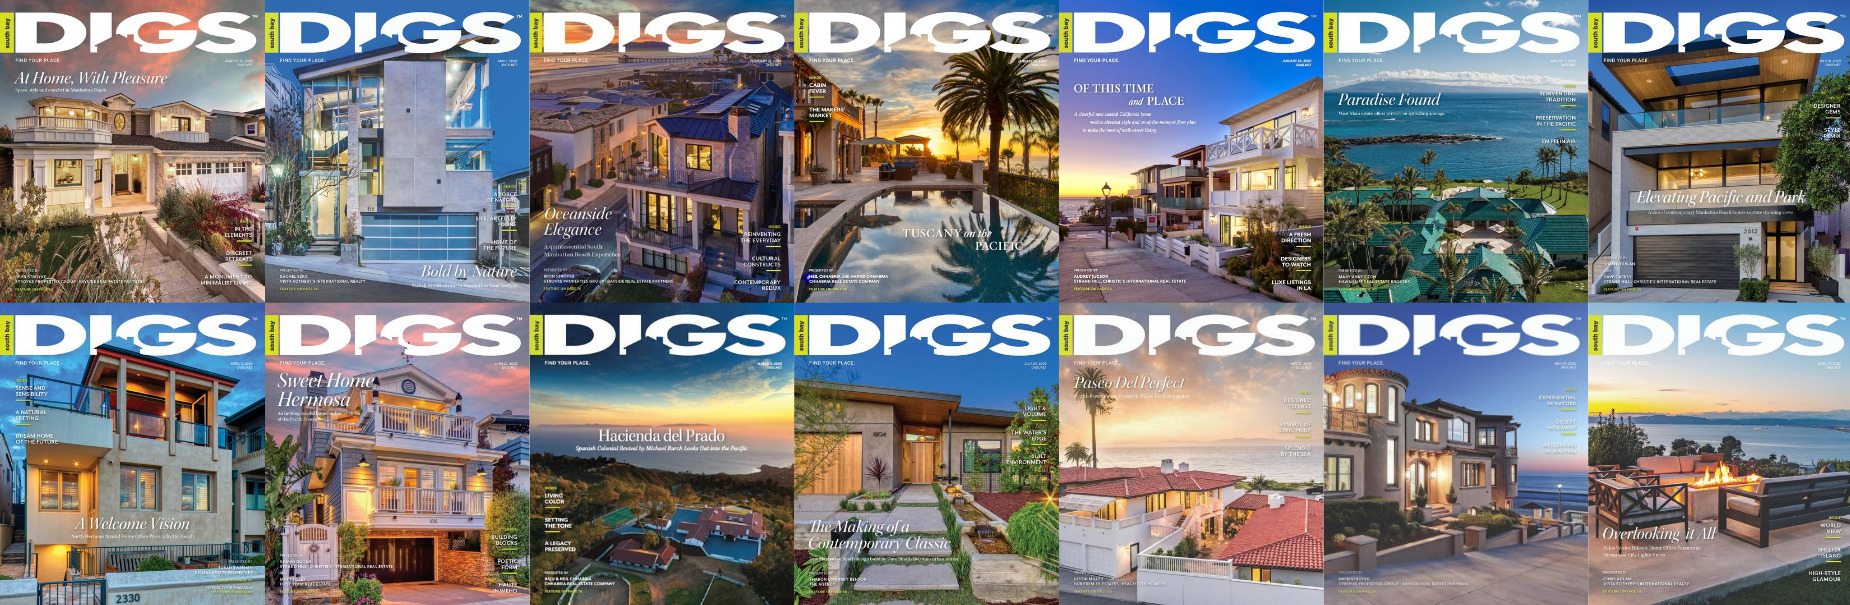 cover of magazine DIGS